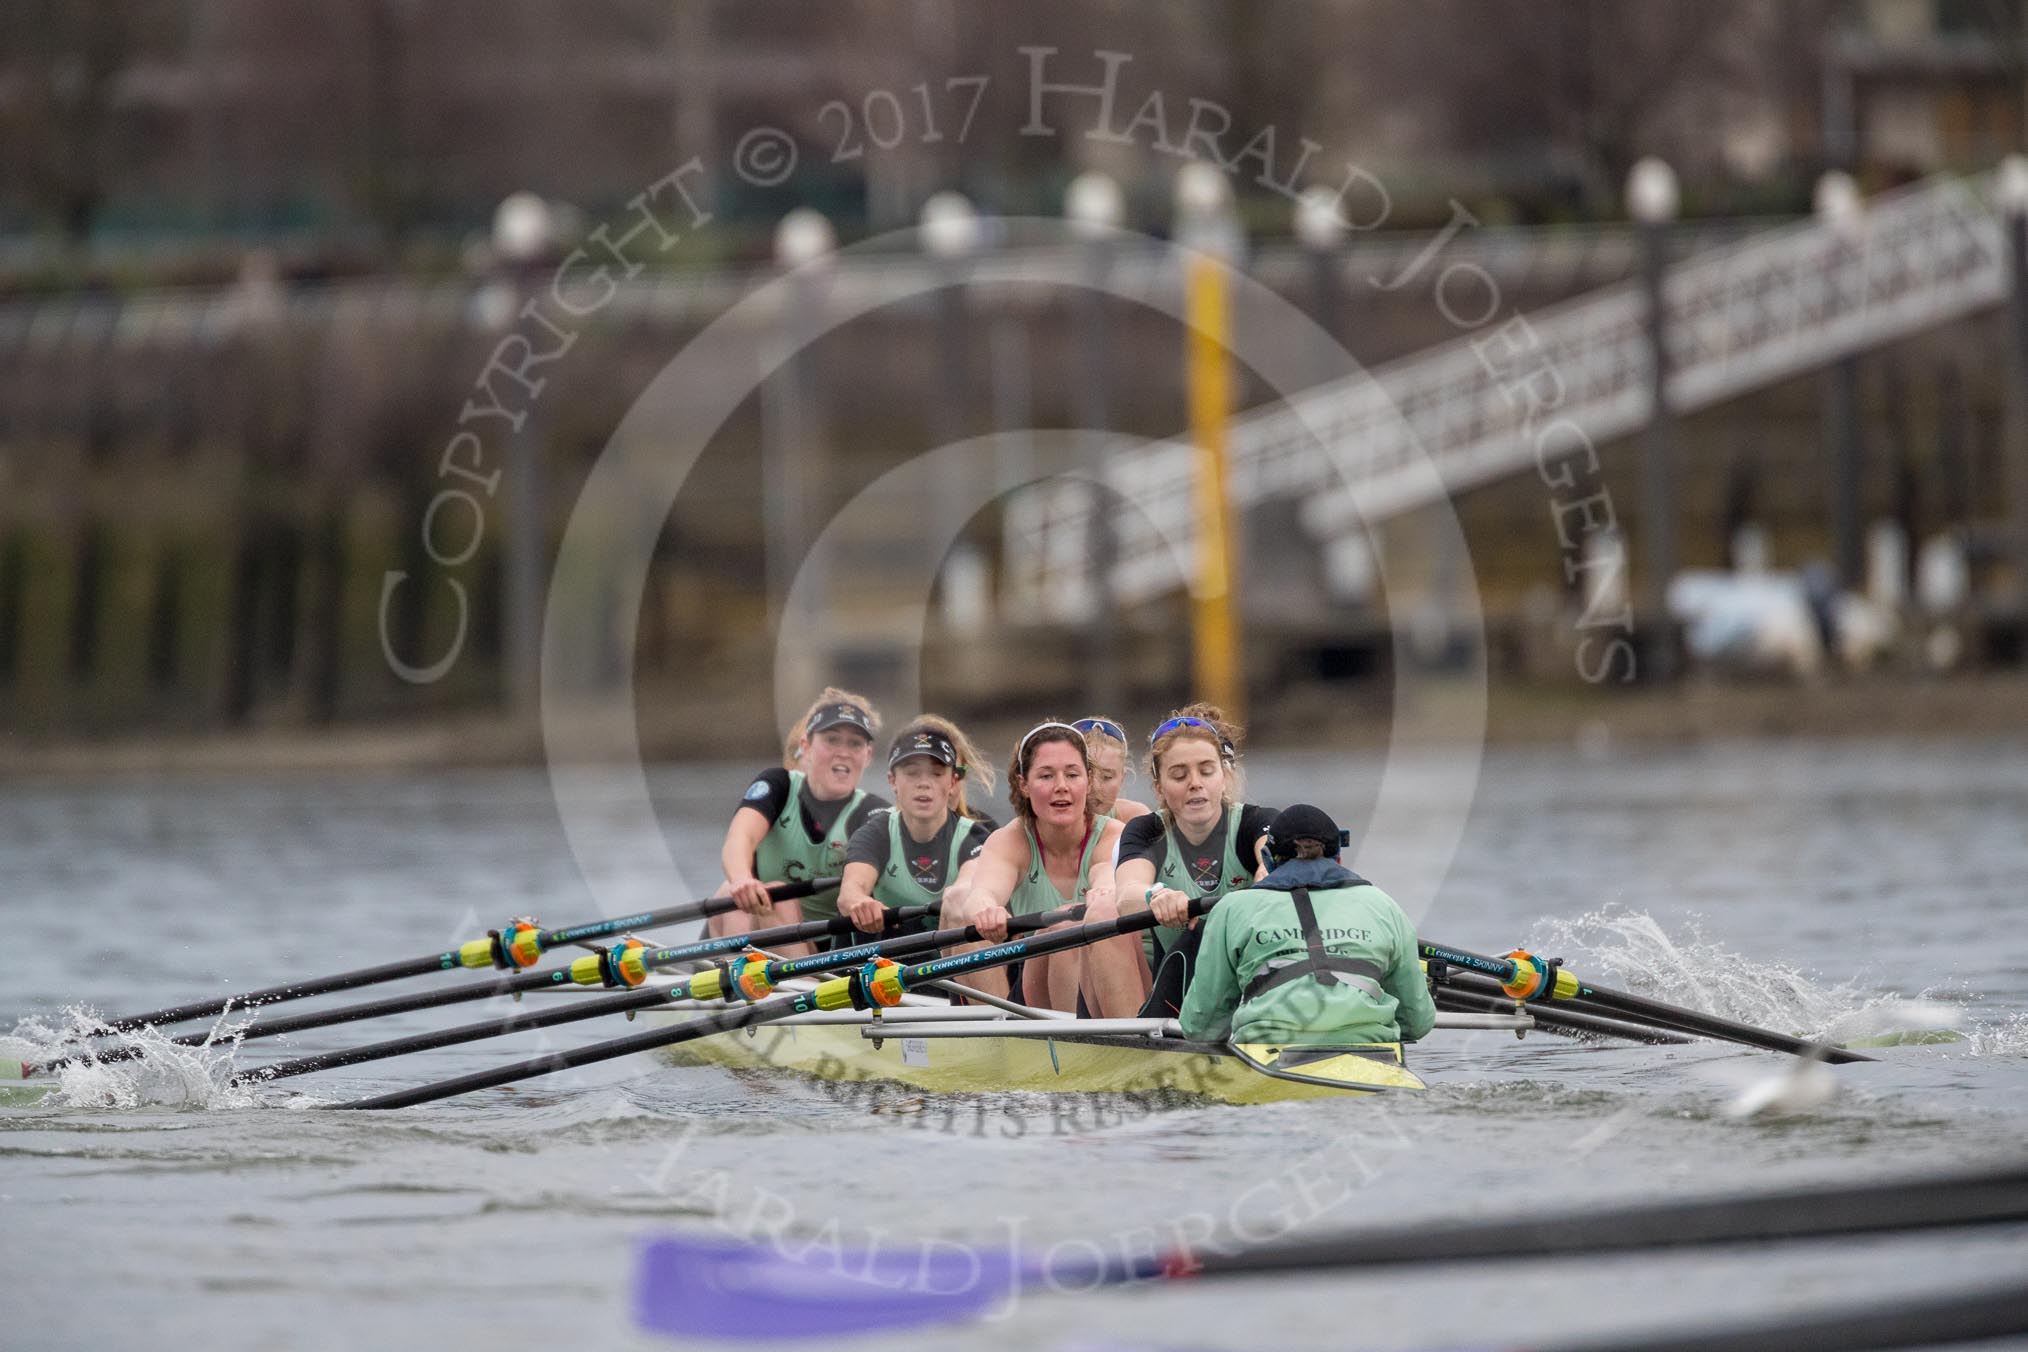 The Boat Race season 2017 - Women's Boat Race Fixture CUWBC vs Univerity of London: CUWBC ahead of UL BC by at least ome length between the Milepost and Hammersmith Bridge.
River Thames between Putney Bridge and Mortlake,
London SW15,

United Kingdom,
on 19 February 2017 at 16:07, image #92